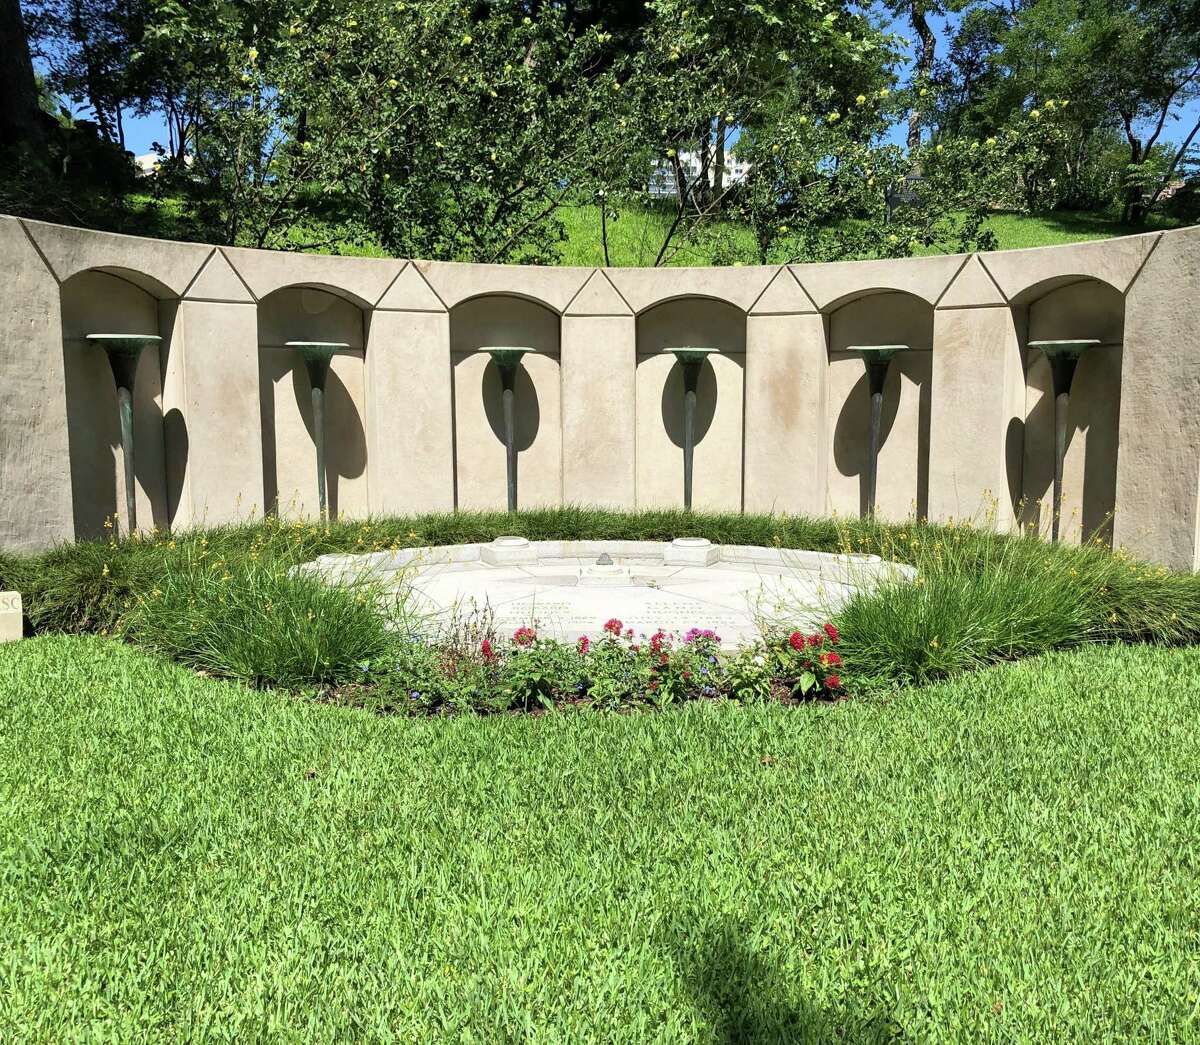 The grave site of Howard Hughes and his parents at Glenwood Cemetery.